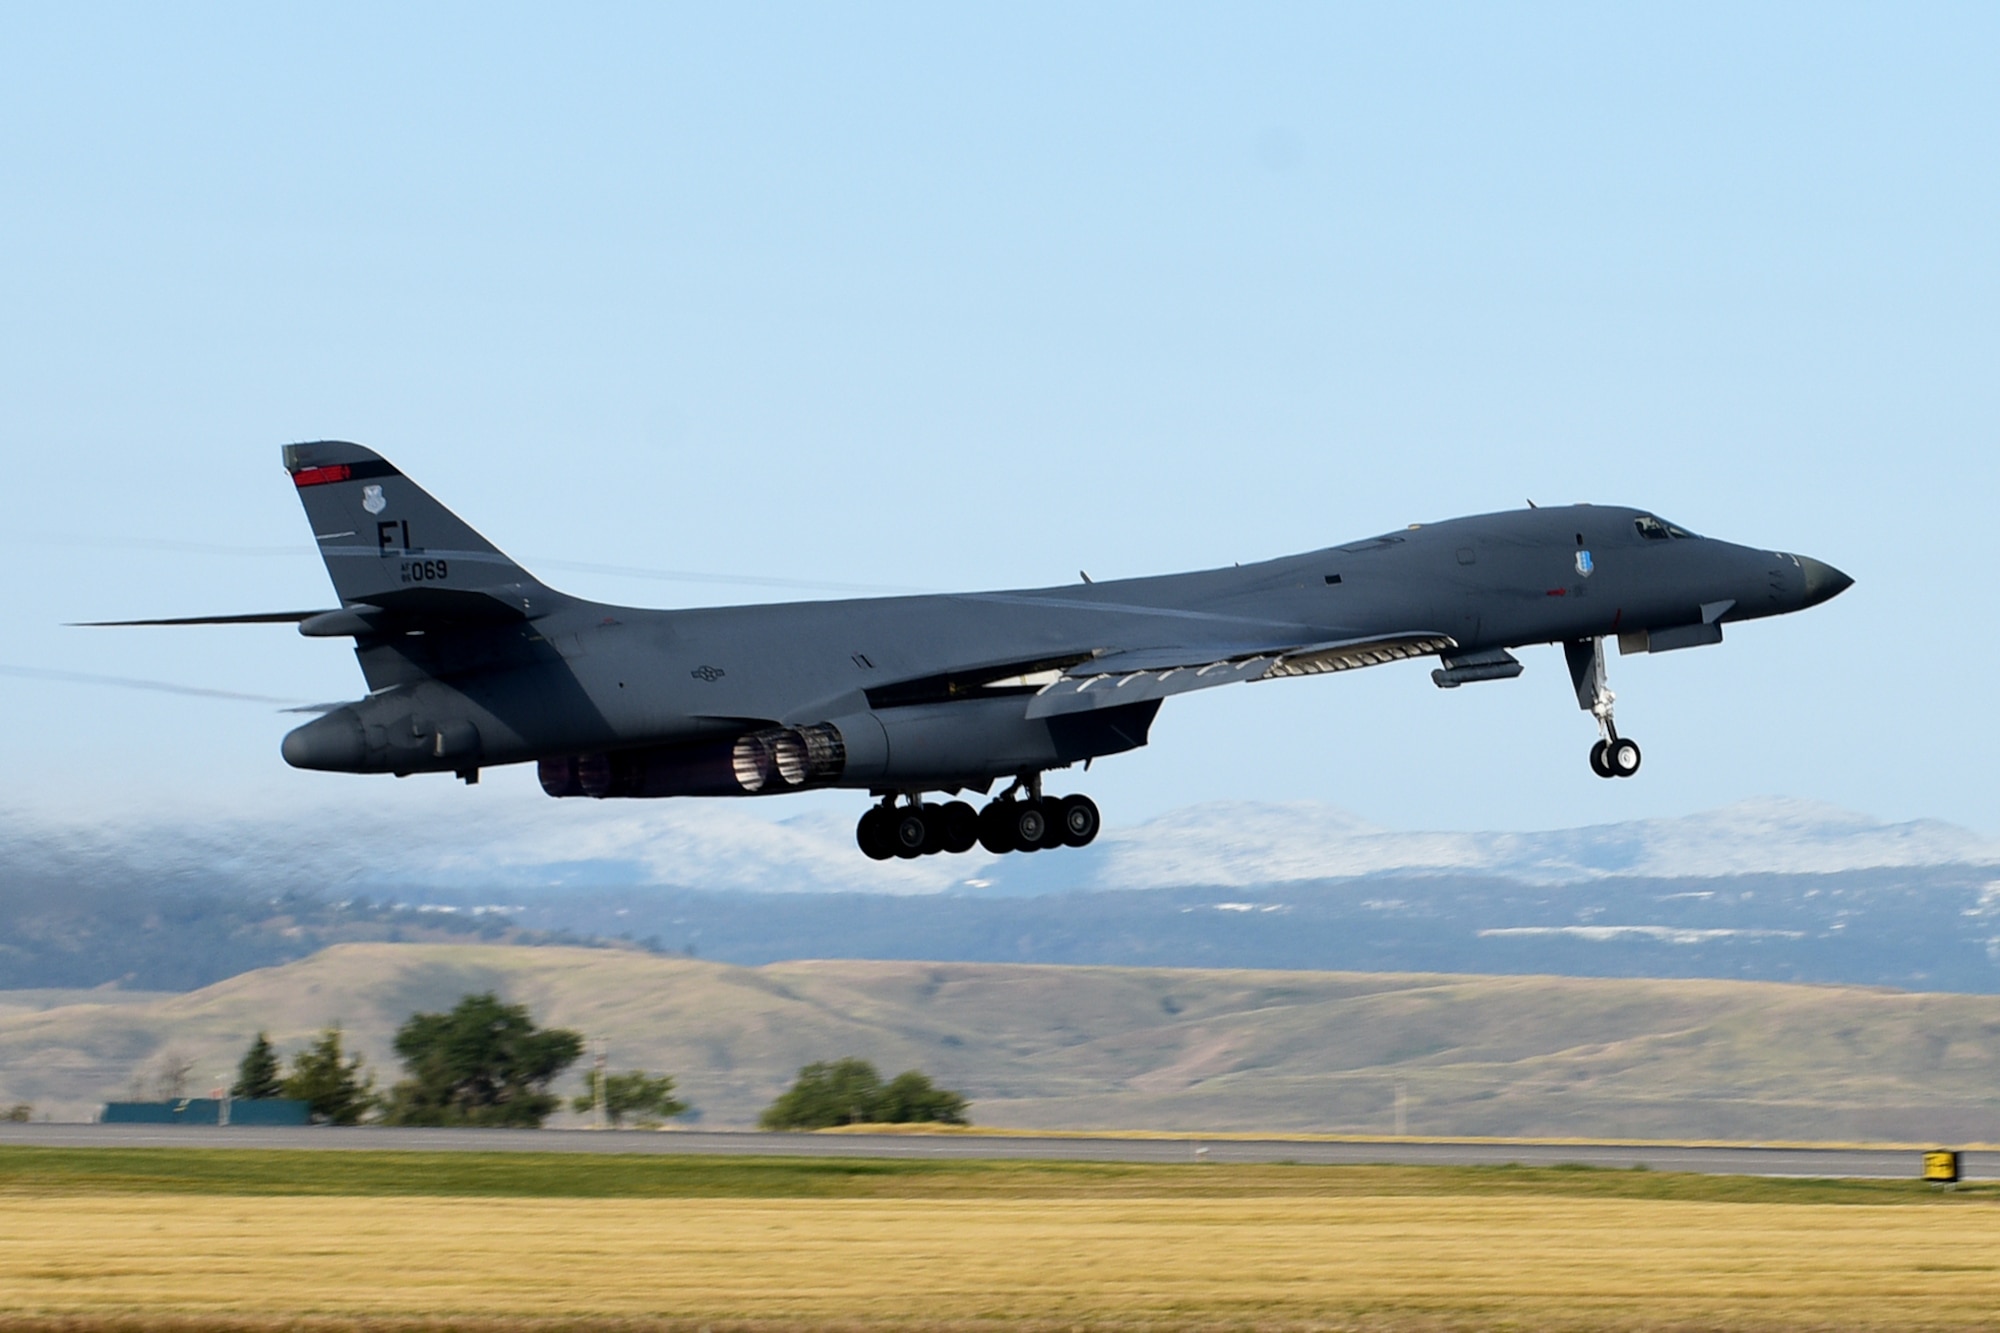 A B-1B Lancer assigned to the 34th Bomb Squadron, Ellsworth Air Force Base, S.D., launches in support
of a Bomber Task Force deployment to Andersen AFB, Guam, Sept. 9, 2020. Four B-1s deployed to Andersen AFB as part of U.S. Strategic Command’s support to the National Defense Strategy objectives of strategic predictability and operational unpredictability by using a mix of different aircraft to and from various dispersed U.S. bases and other departure and arrival points, to include Guam. (U.S. Air Force
photo by Airman 1st Class Quentin Marx)